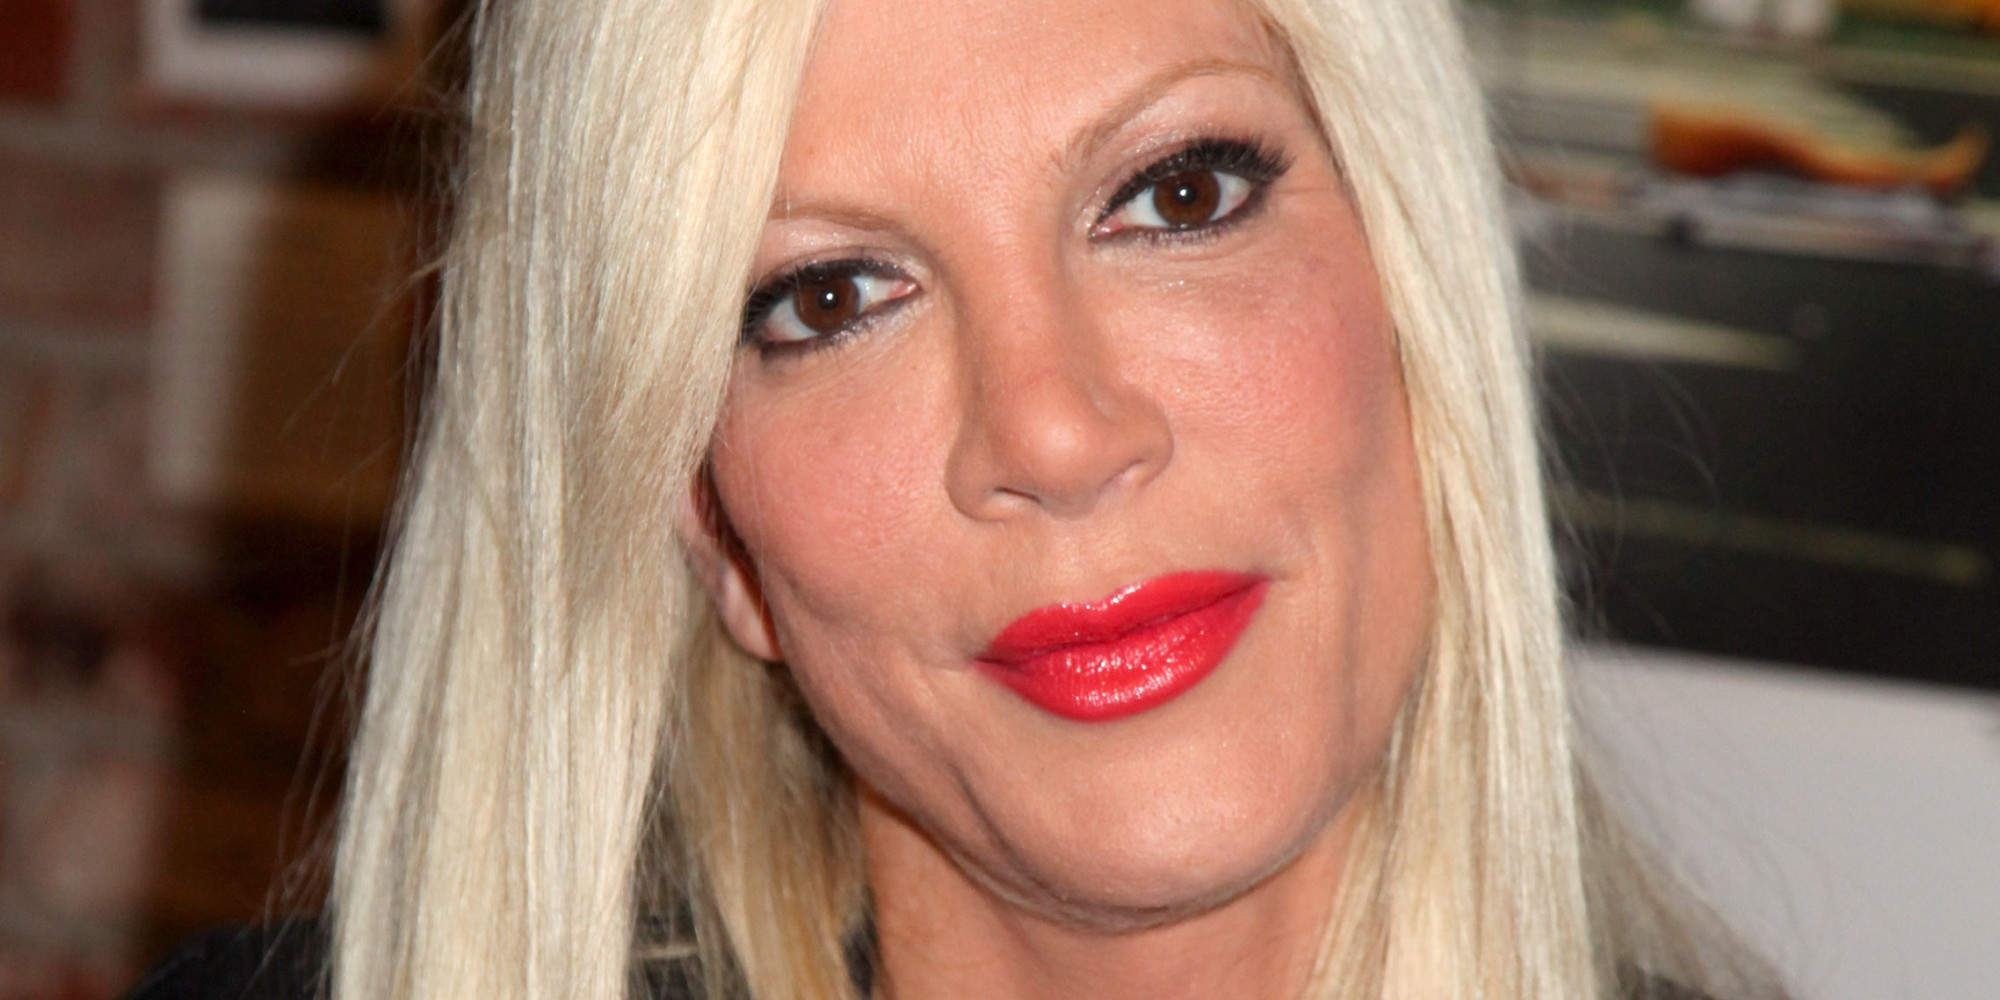 Tori Spelling Hospitalized Amid Marriage Woes2000 x 1000